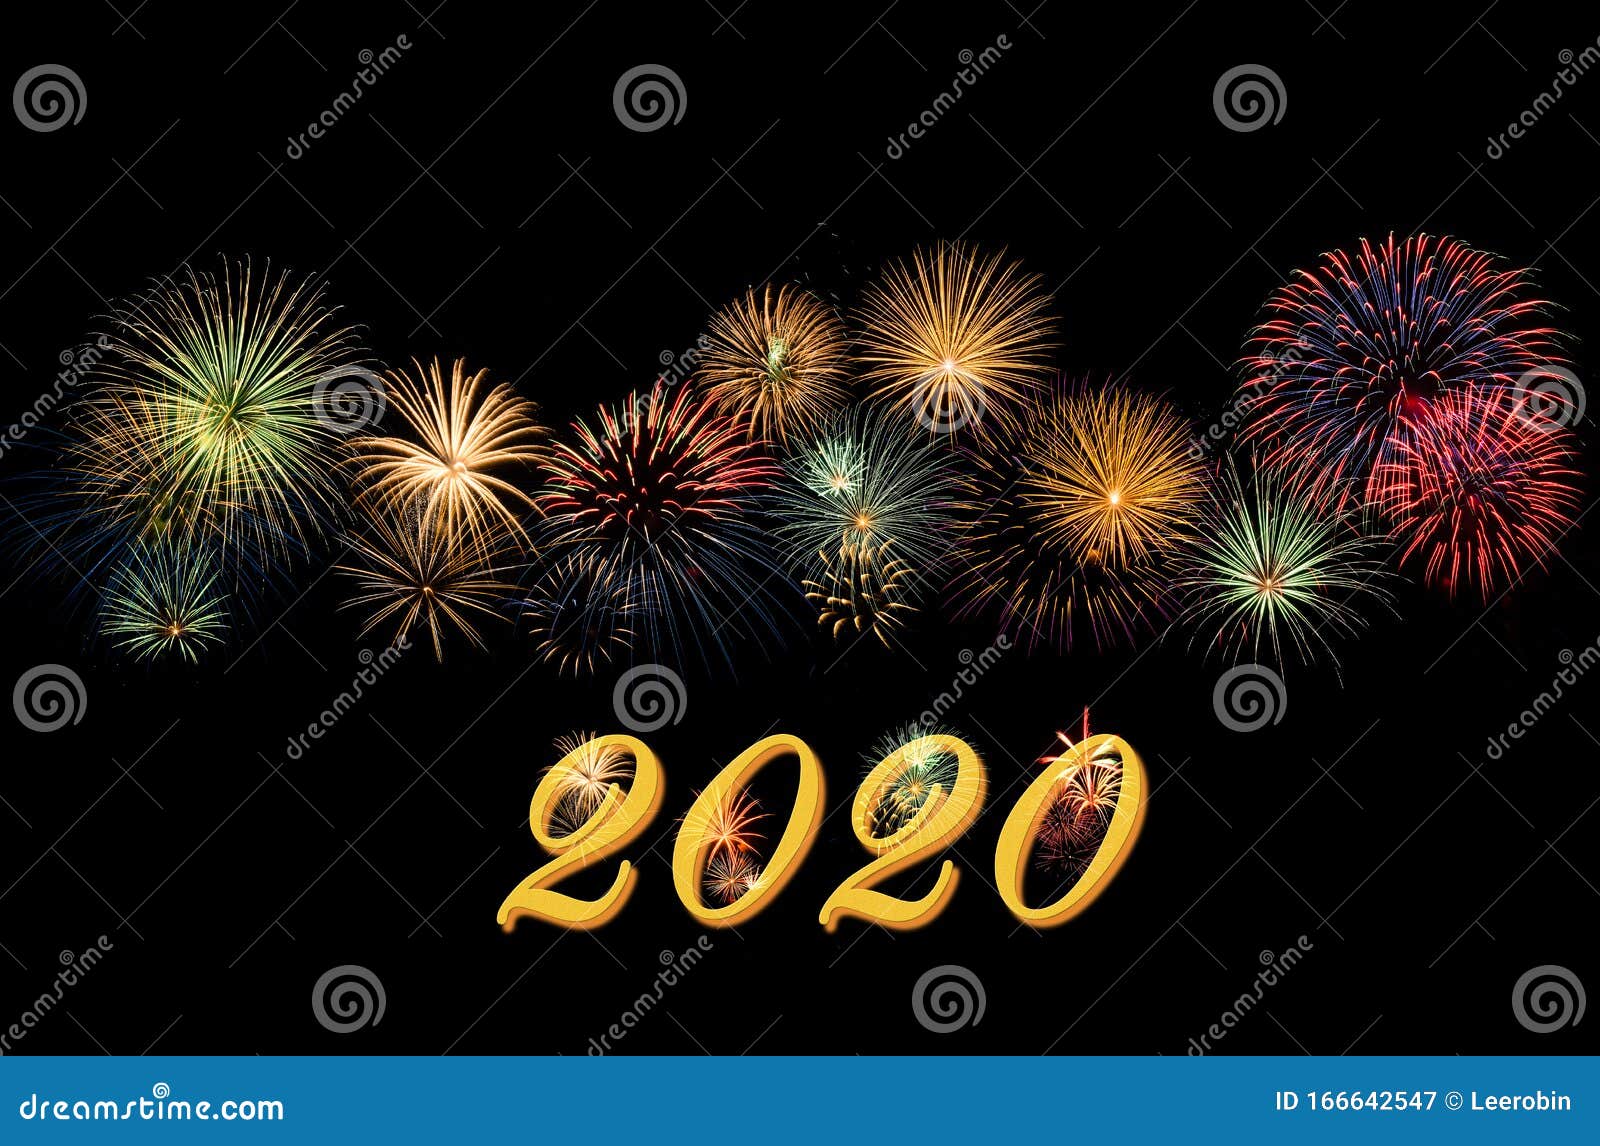 Fireworks for a Happy New Year 2020 Wishes Stock Illustration ...